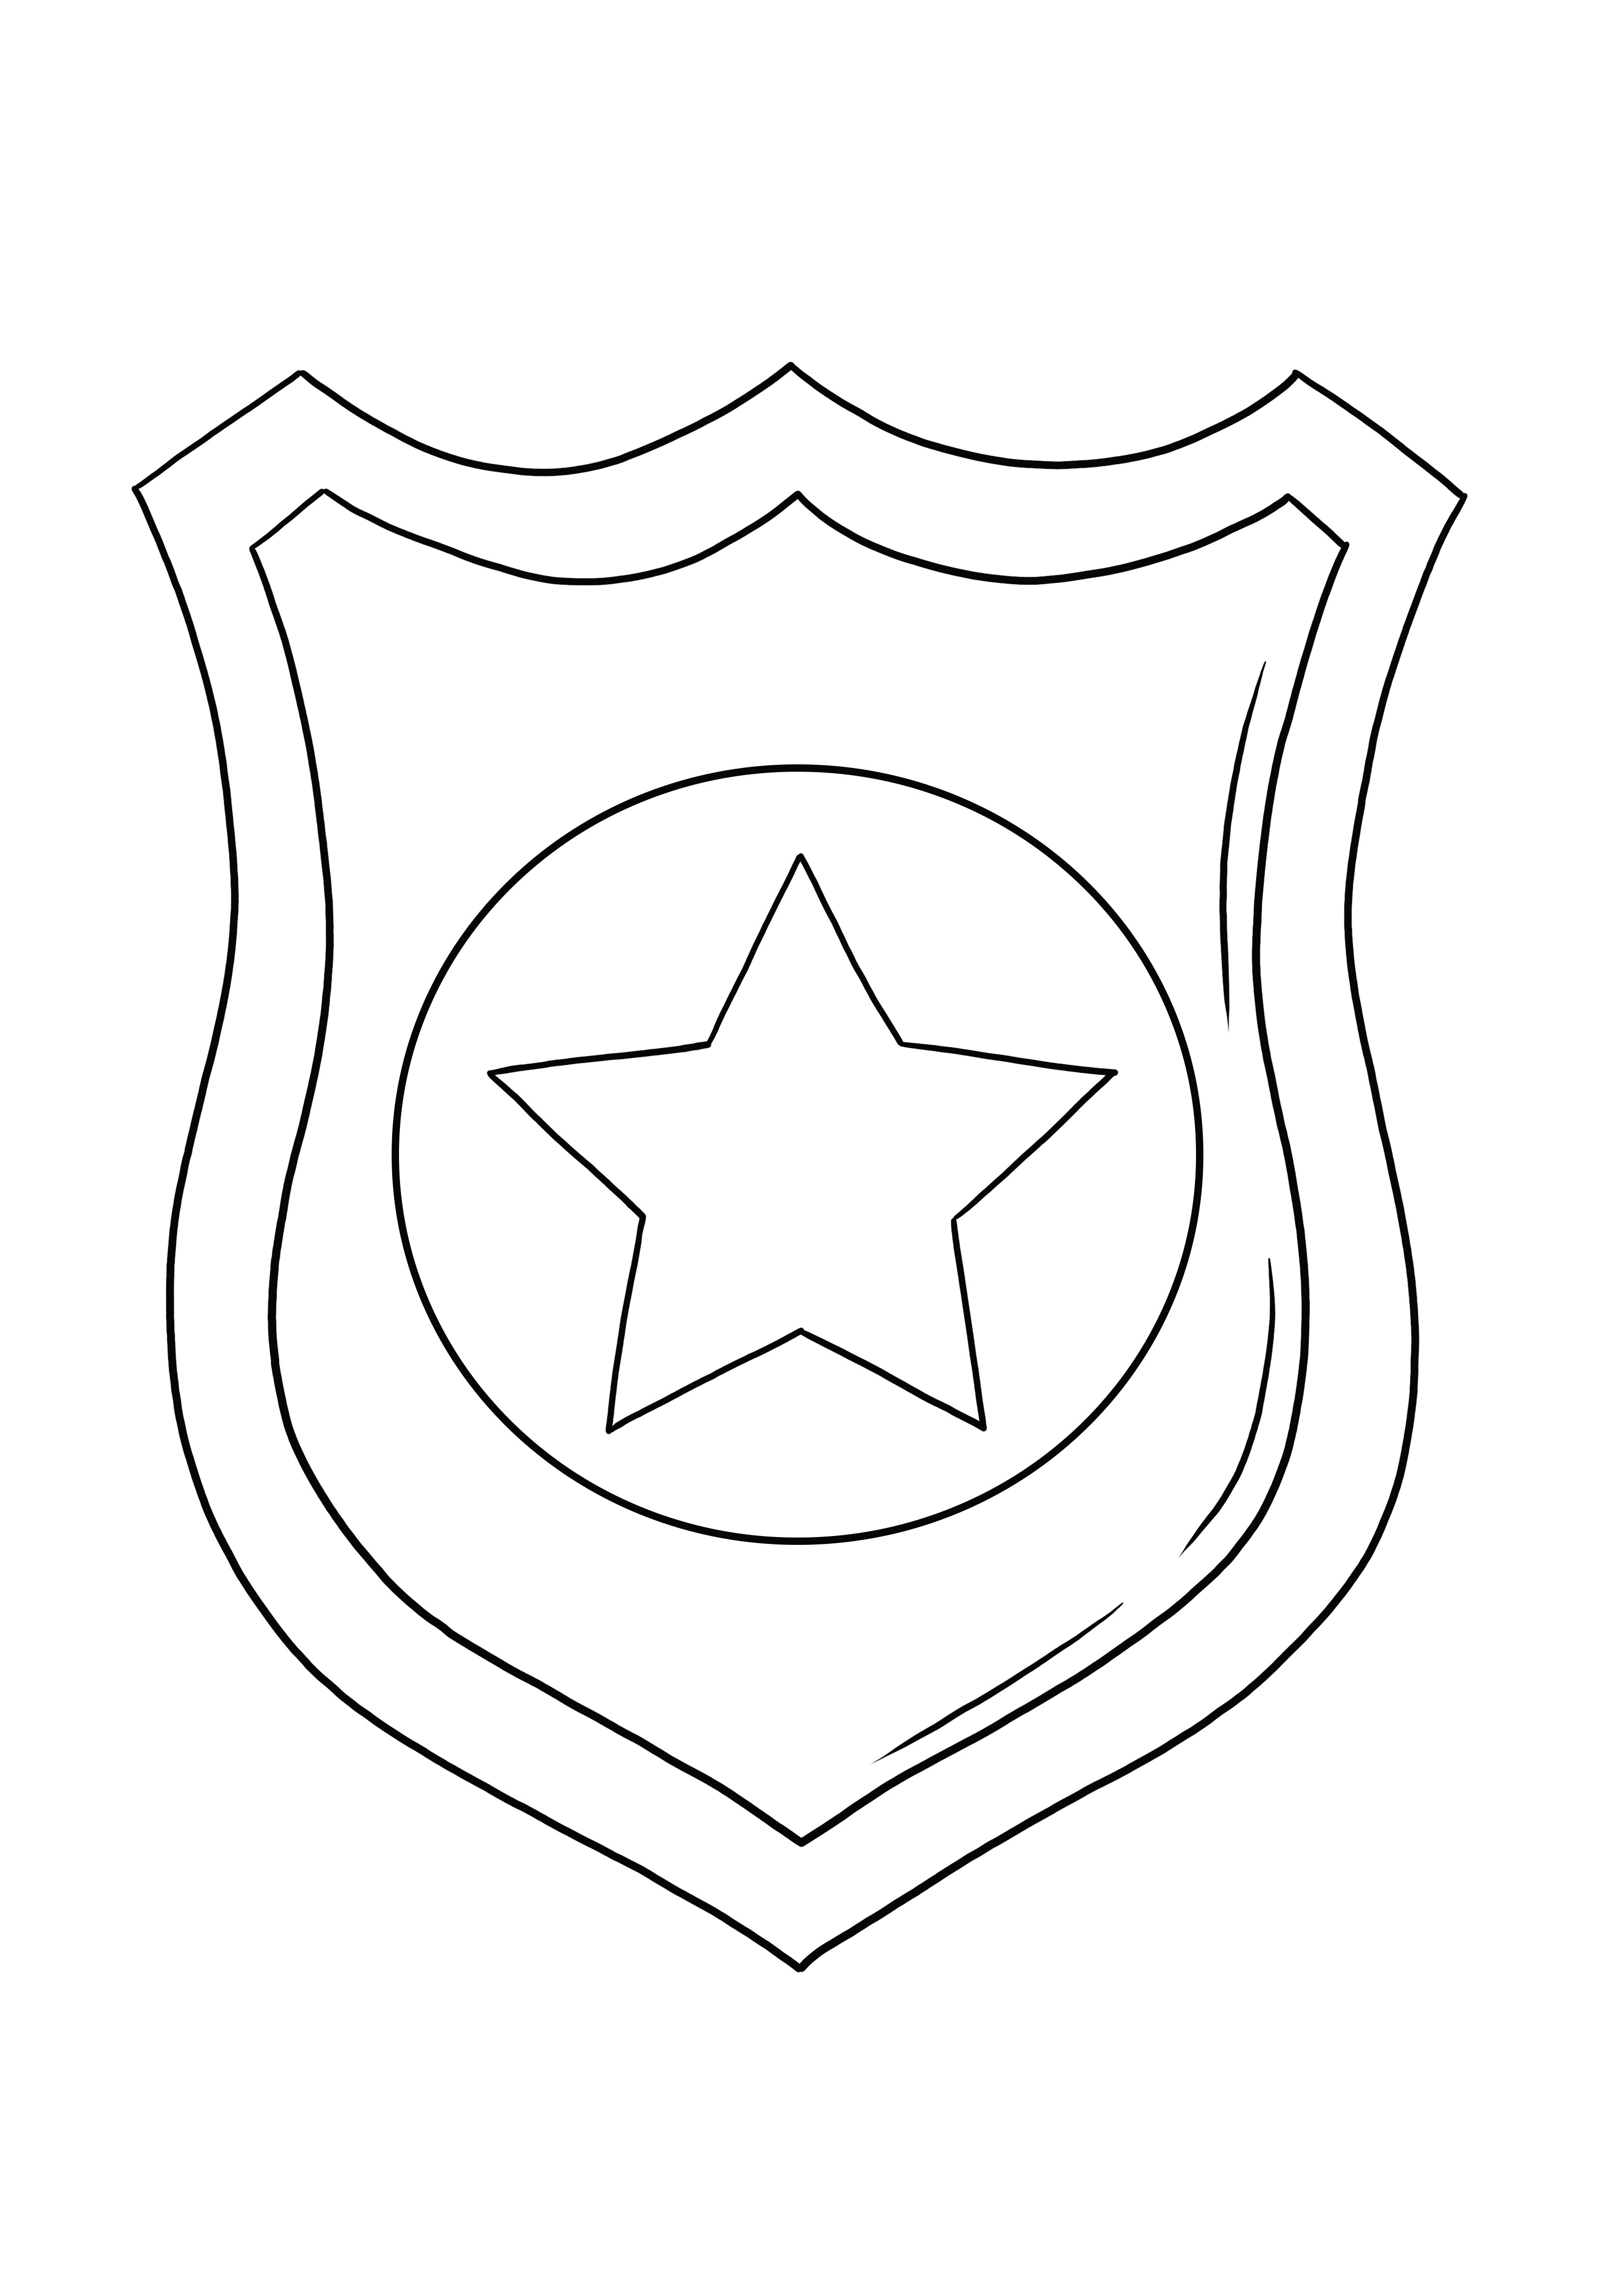 Here is a simple Police Badge free printable coloring sheet for kids